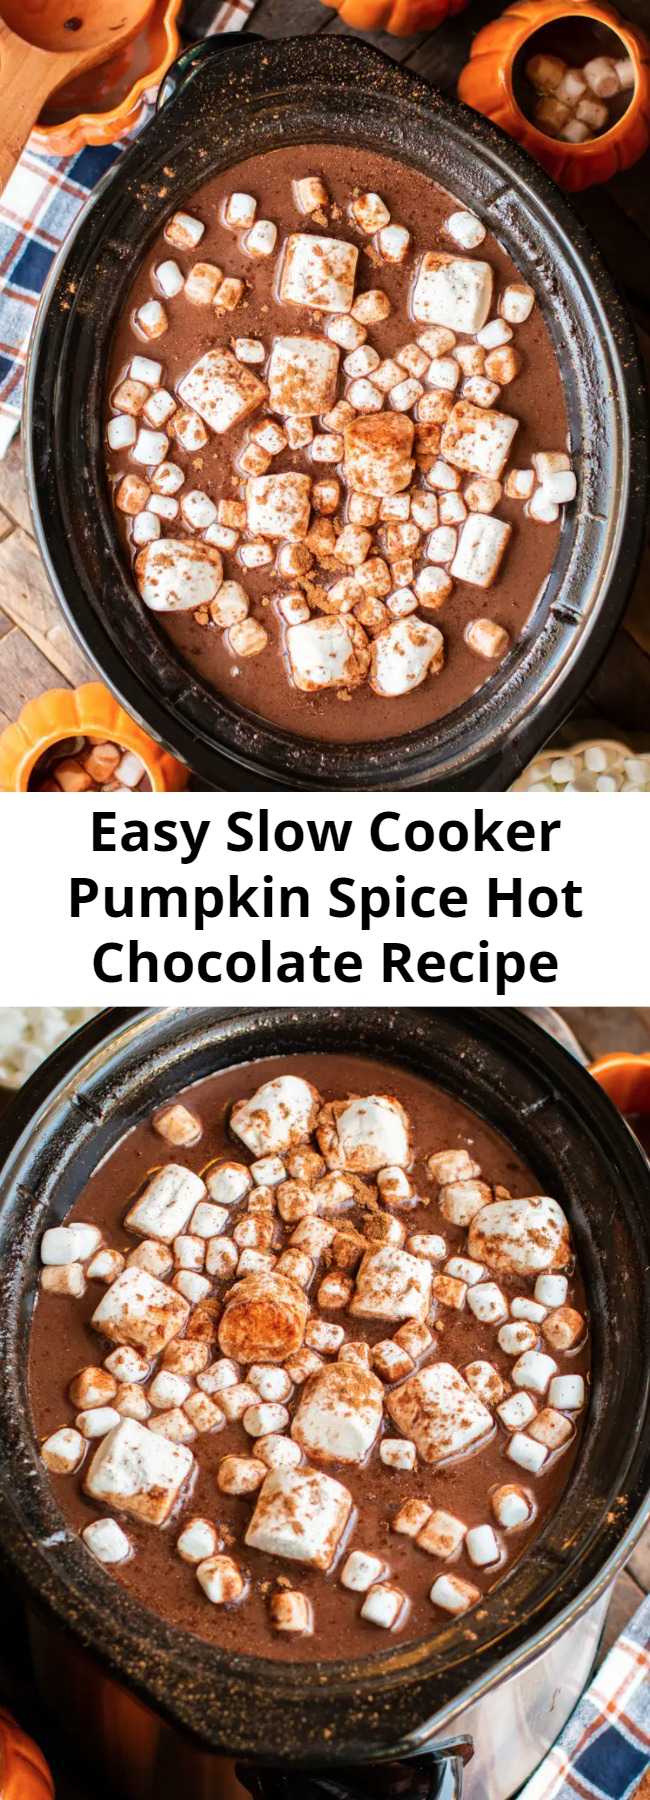 Easy Slow Cooker Pumpkin Spice Hot Chocolate Recipe - Pumpkin Spice Hot Chocolate easily made in the slow cooker! It's a delicious party drink that you and your guests will love.